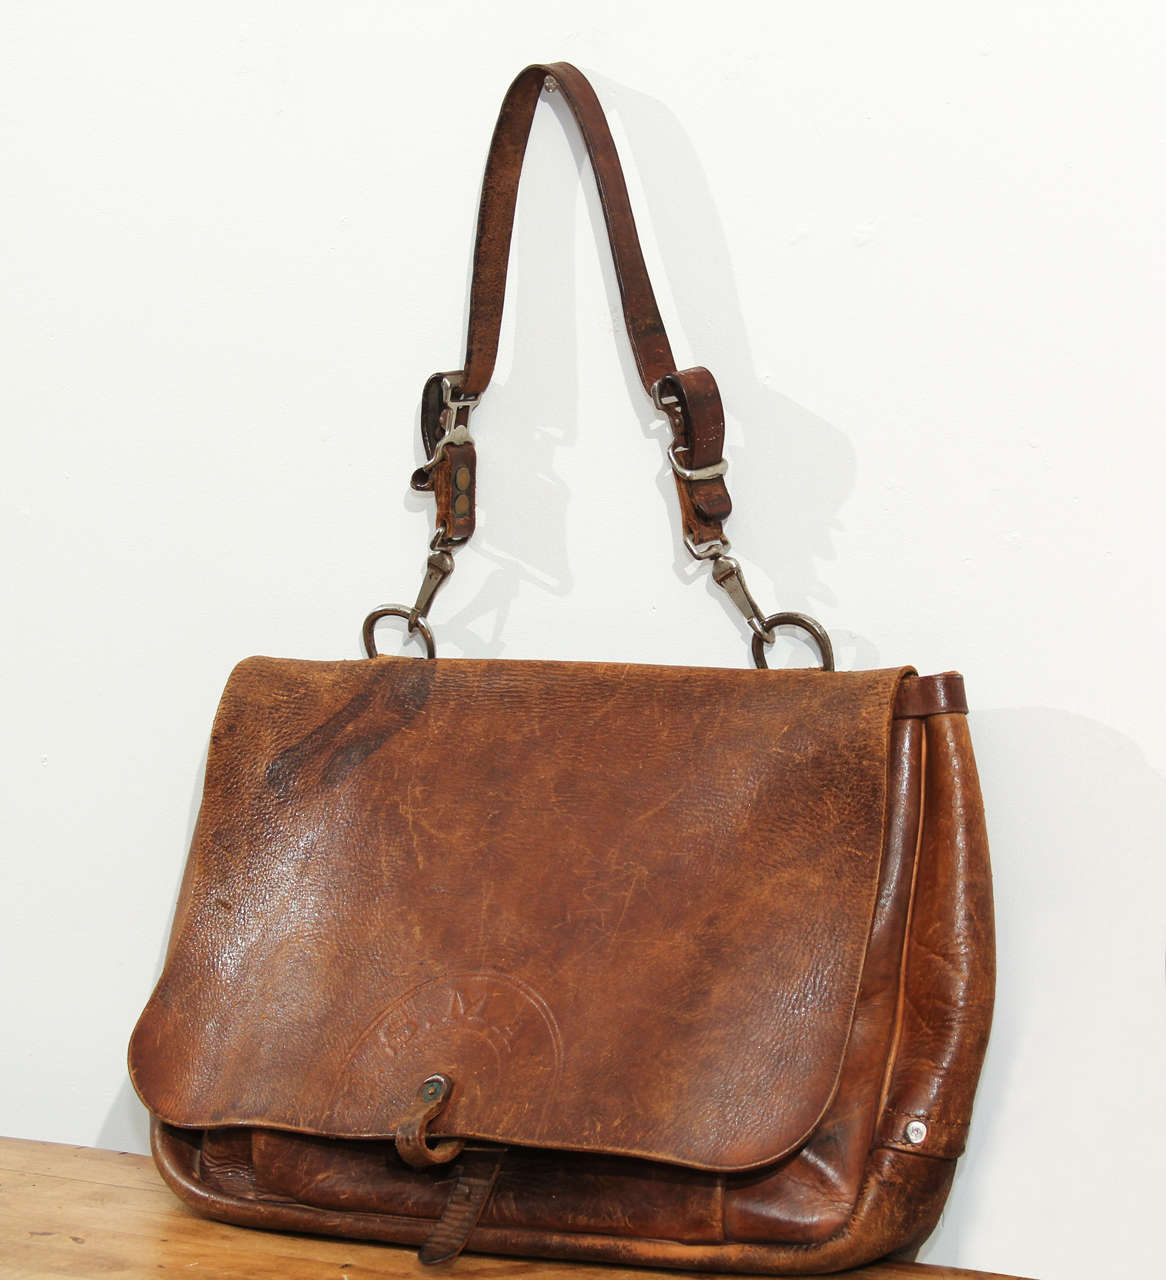 Vintage Bucheimer Mfg. cowhide mail bag with US Mail embossed on the flap.   Well-worn patina with chromed metal hardware.